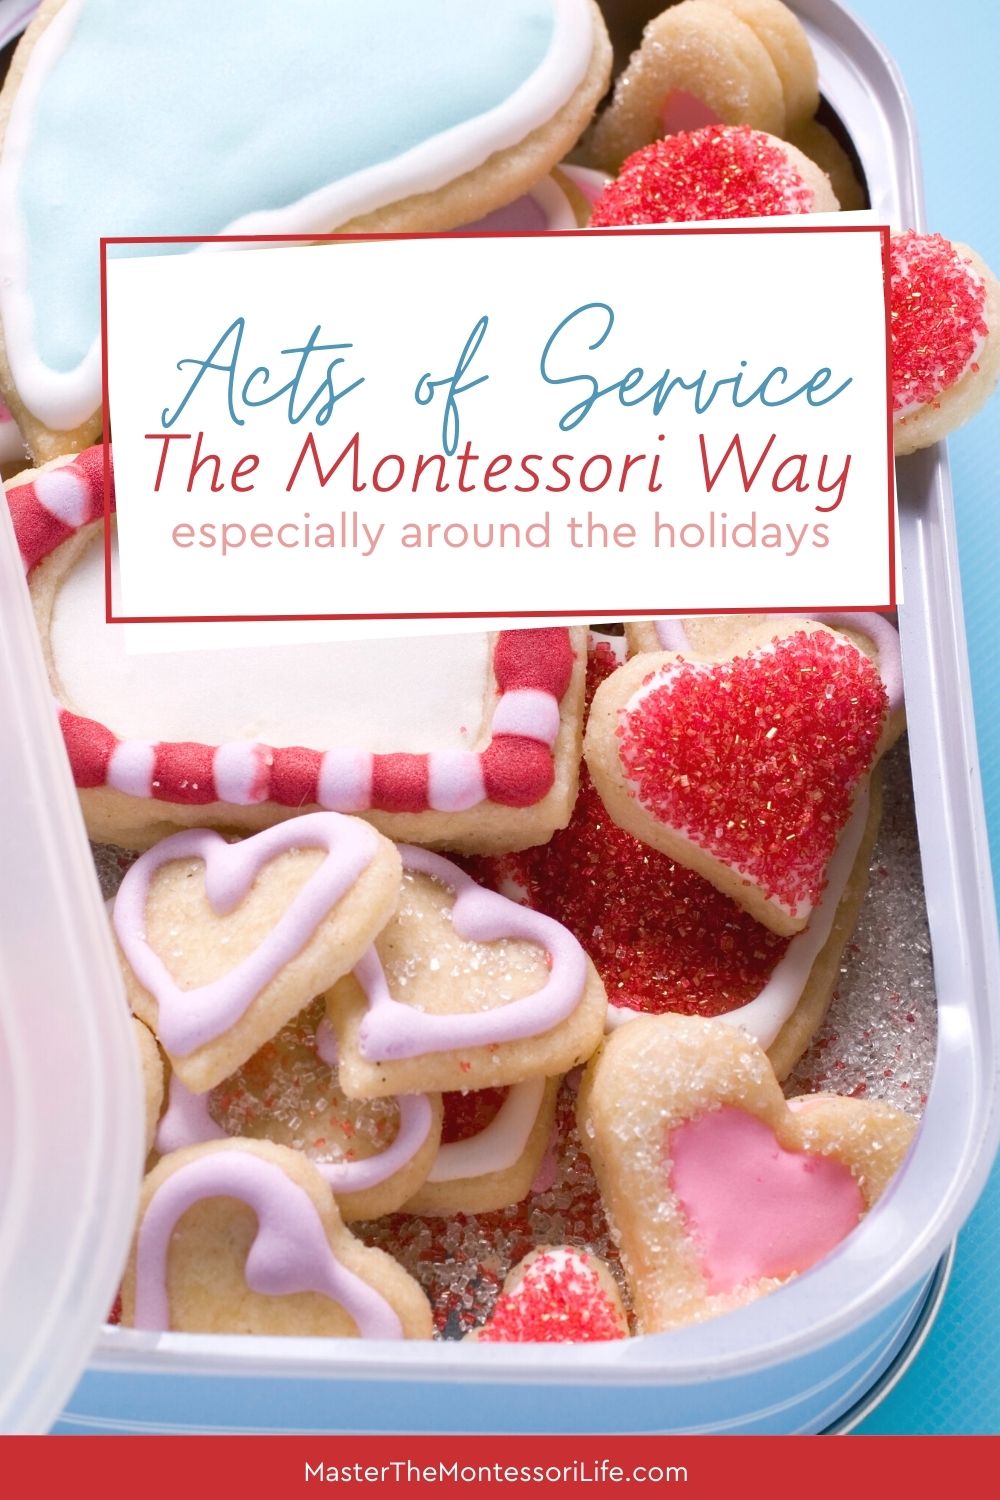 Acts of Service the Montessori Way